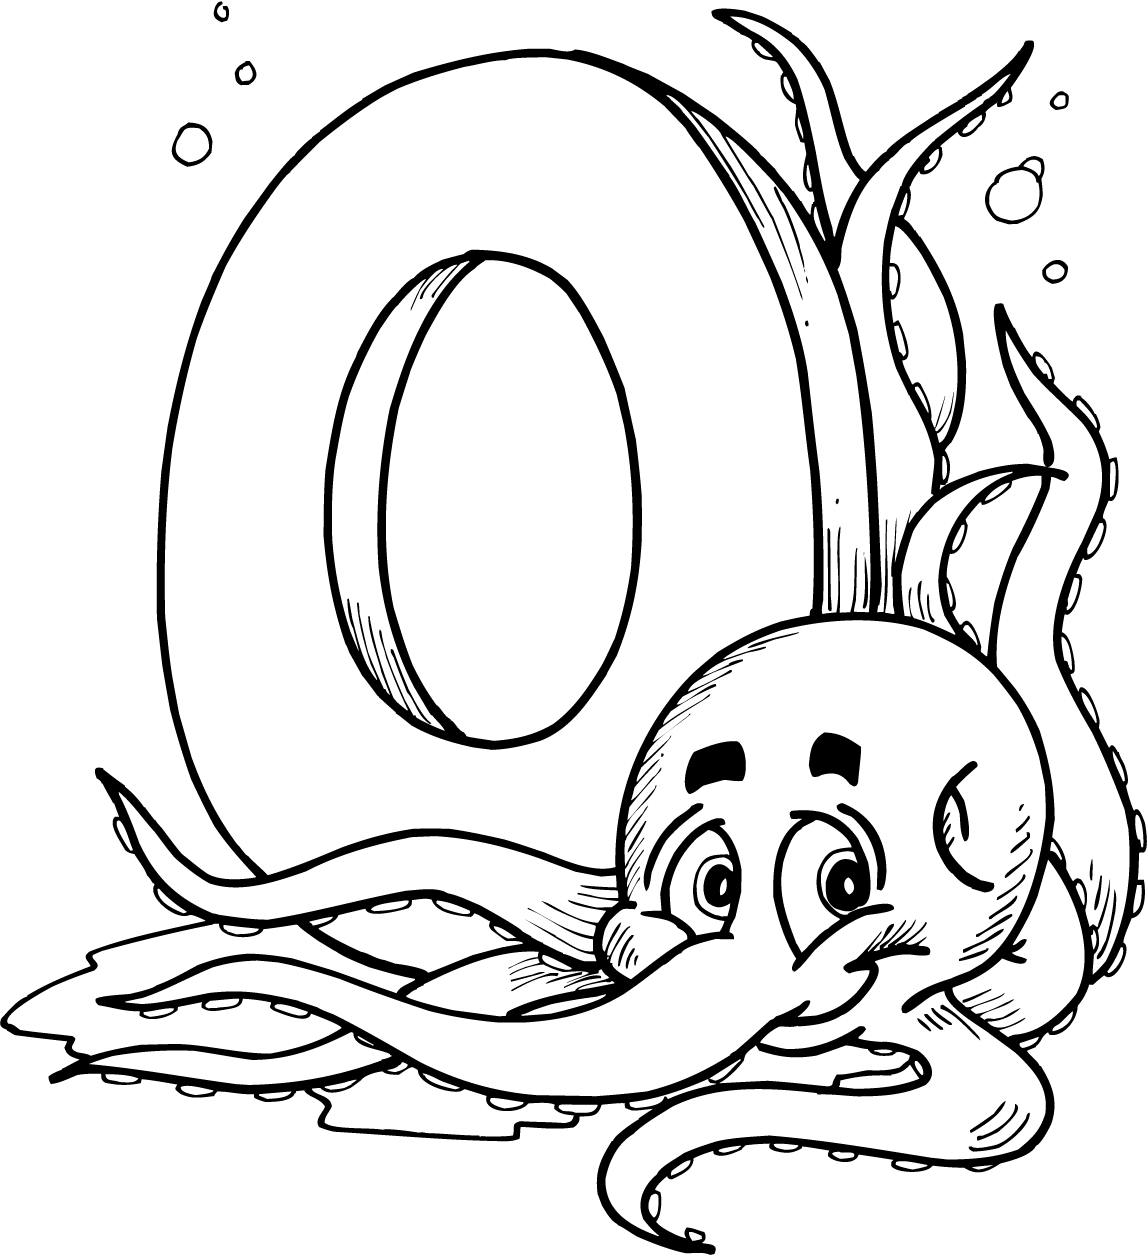 letter-o-coloring-pages-to-download-and-print-for-free